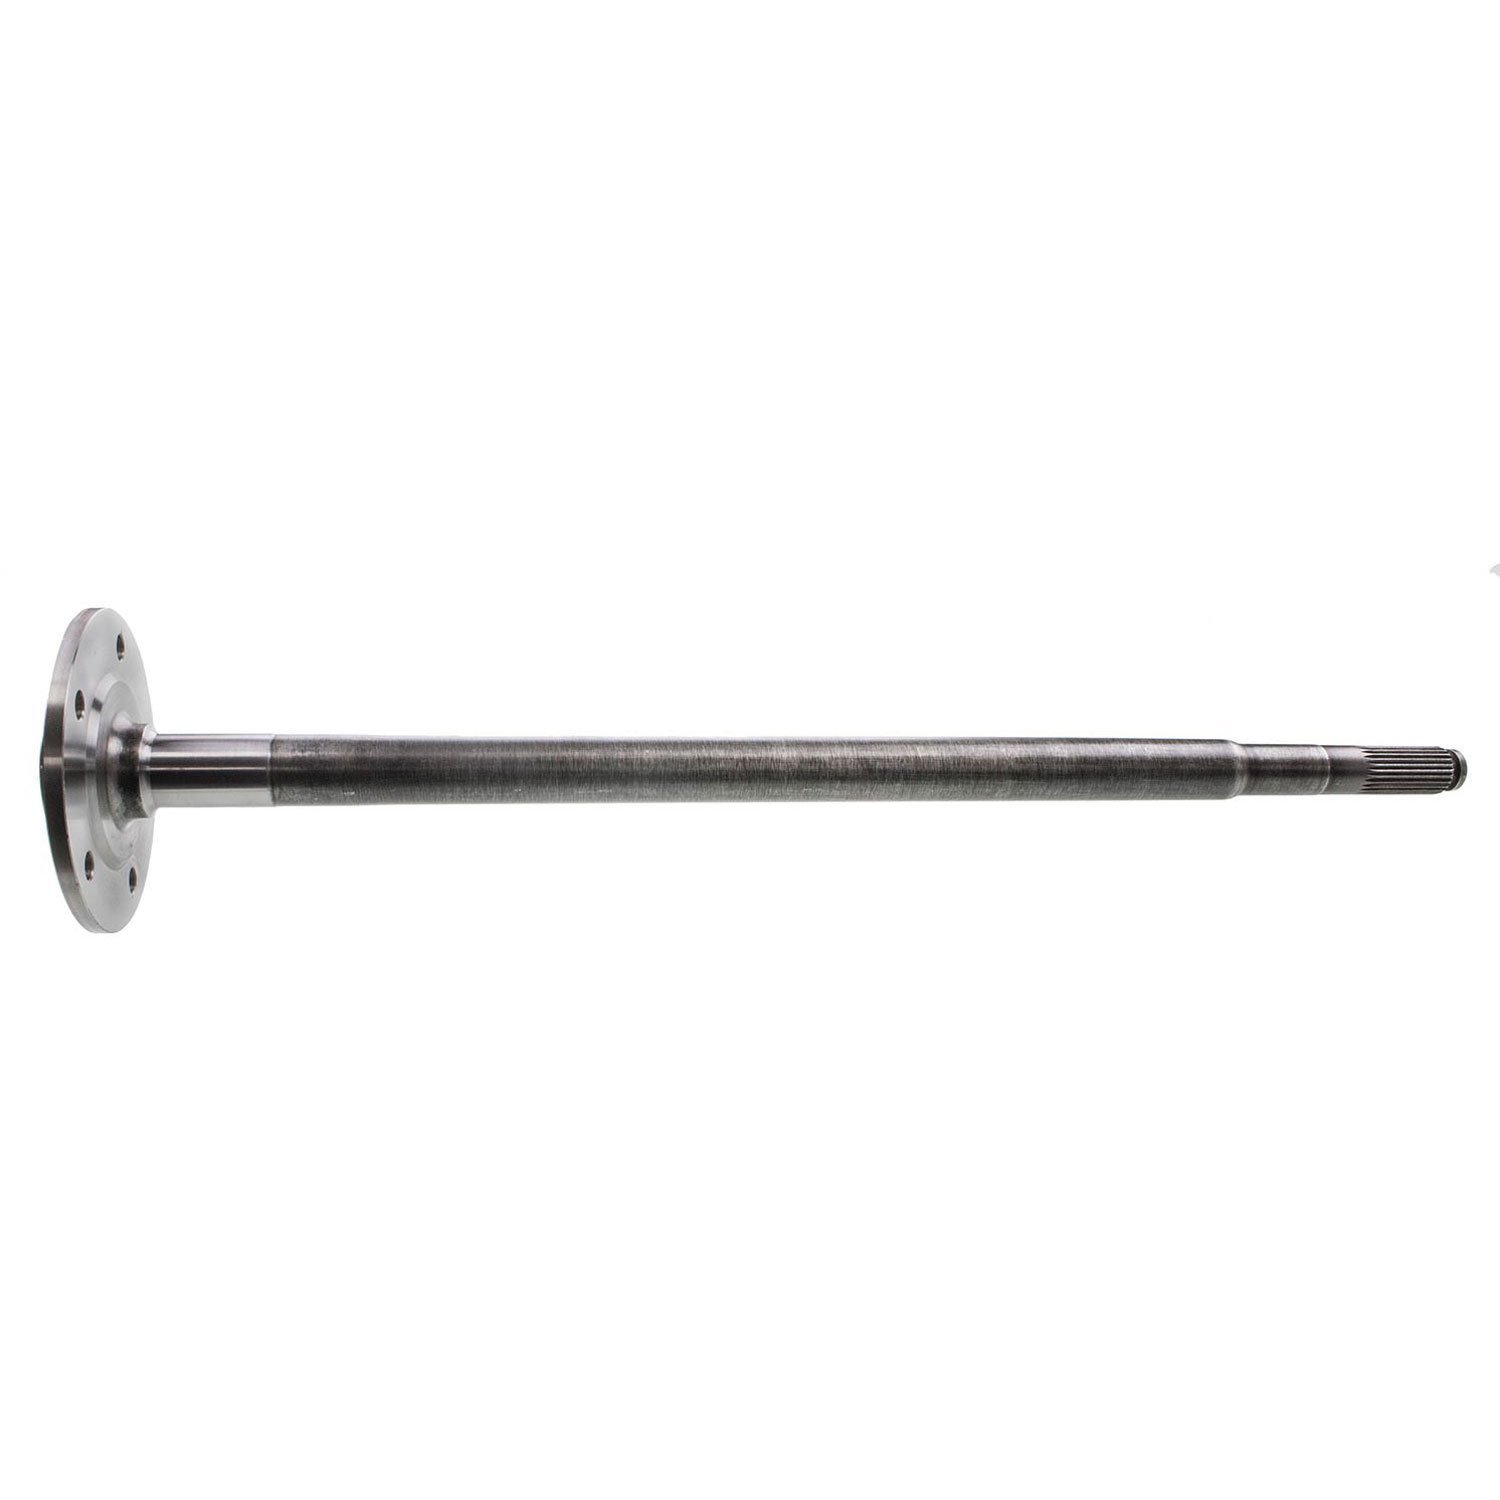 Axle Shaft 29 in. Overall Length 5 Lugs